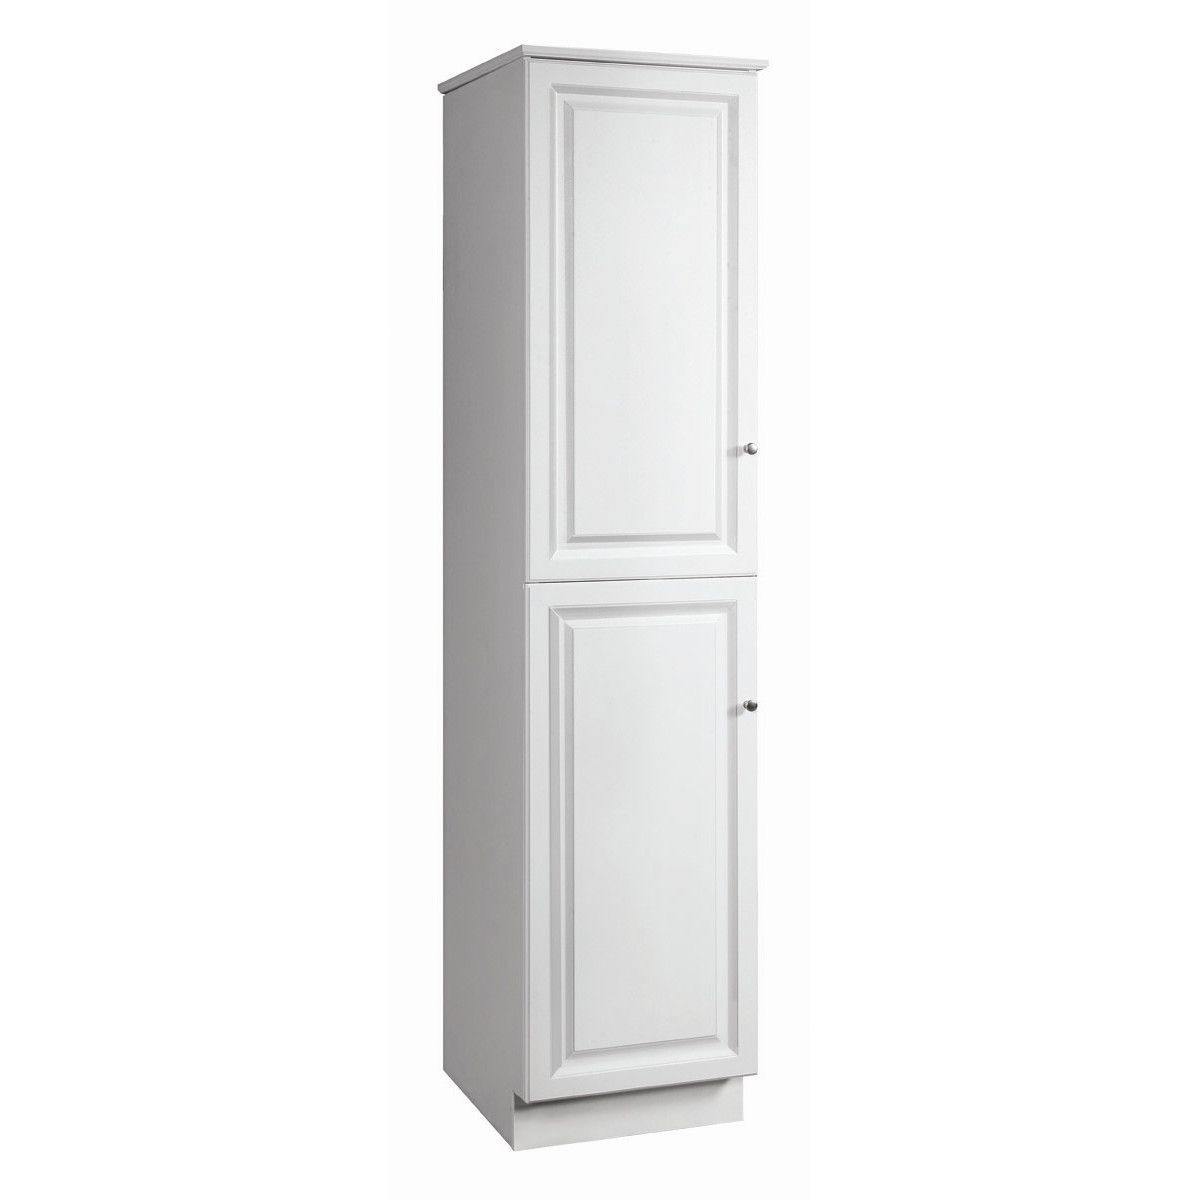 Design House 539700 84-Inch by 21-Inch Wyndham Ready-To-Assemble 2 Door Linen Cabinet, White